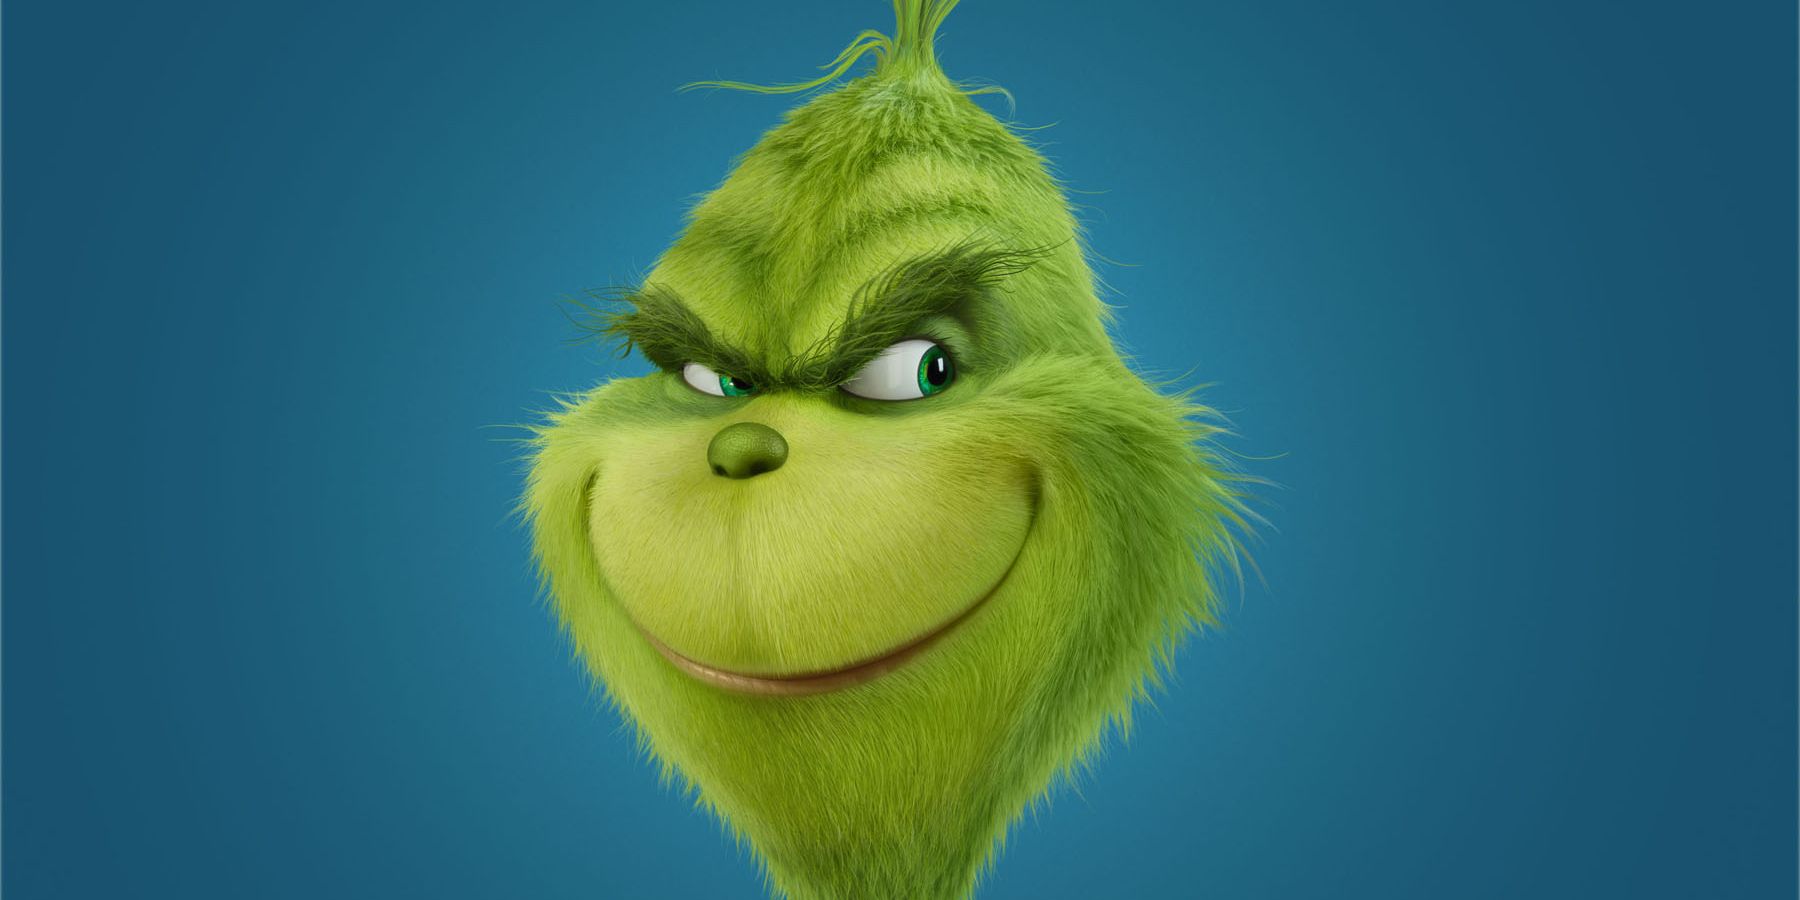 Like The Grinch Stole Christmas Universal Movie